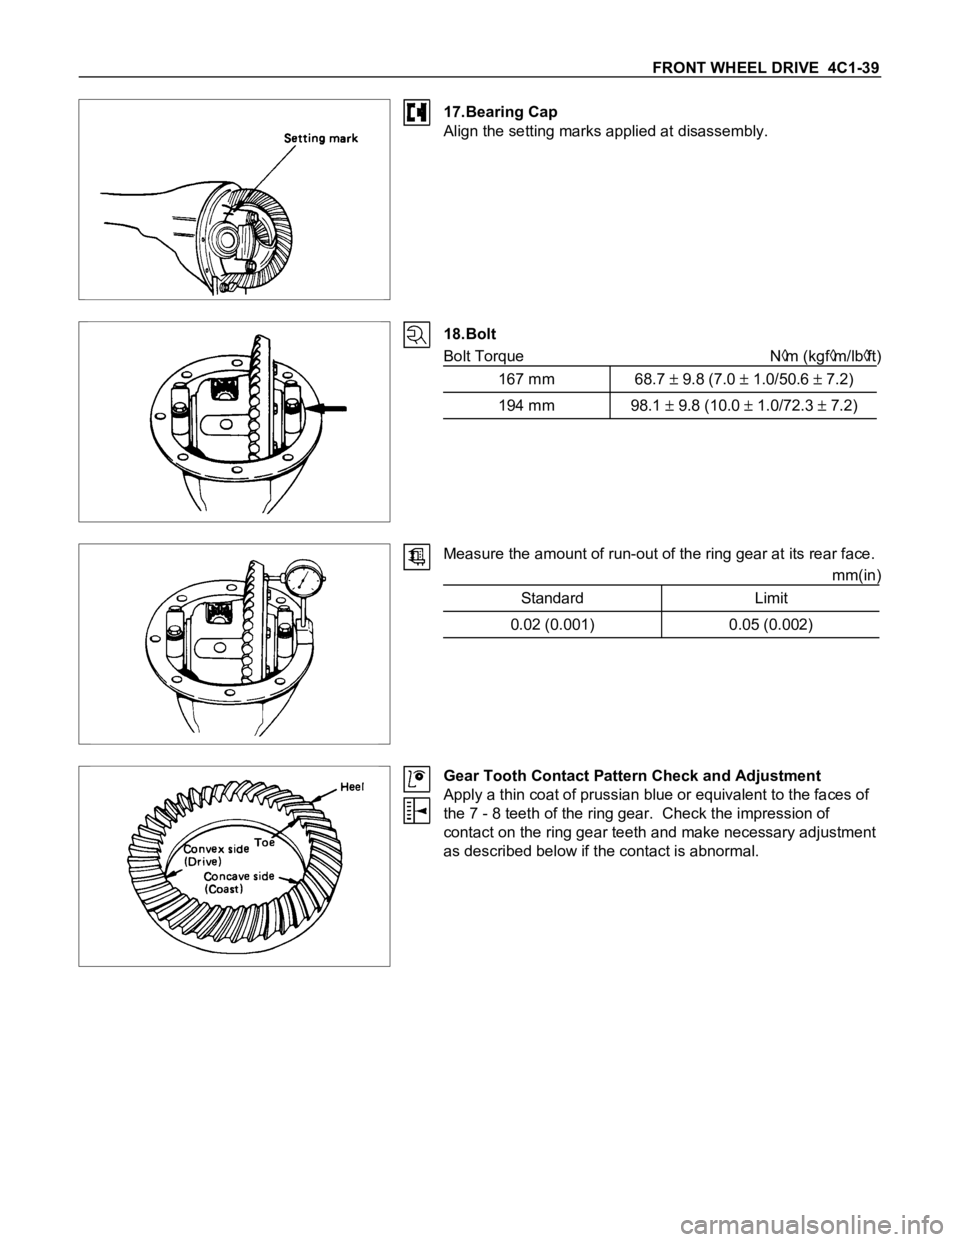 ISUZU TFS SERIES 1997  Workshop Manual FRONT WHEEL DRIVE  4C1-39
17.Bearing Cap
Align the setting marks applied at disassembly.
18.Bolt
Bolt Torque N
m (kgfm/lbft)
167 mm 68.7 
 9.8 (7.0  1.0/50.6  7.2)
194 mm 98.1  9.8 (10.0  1.0/72.3  7.